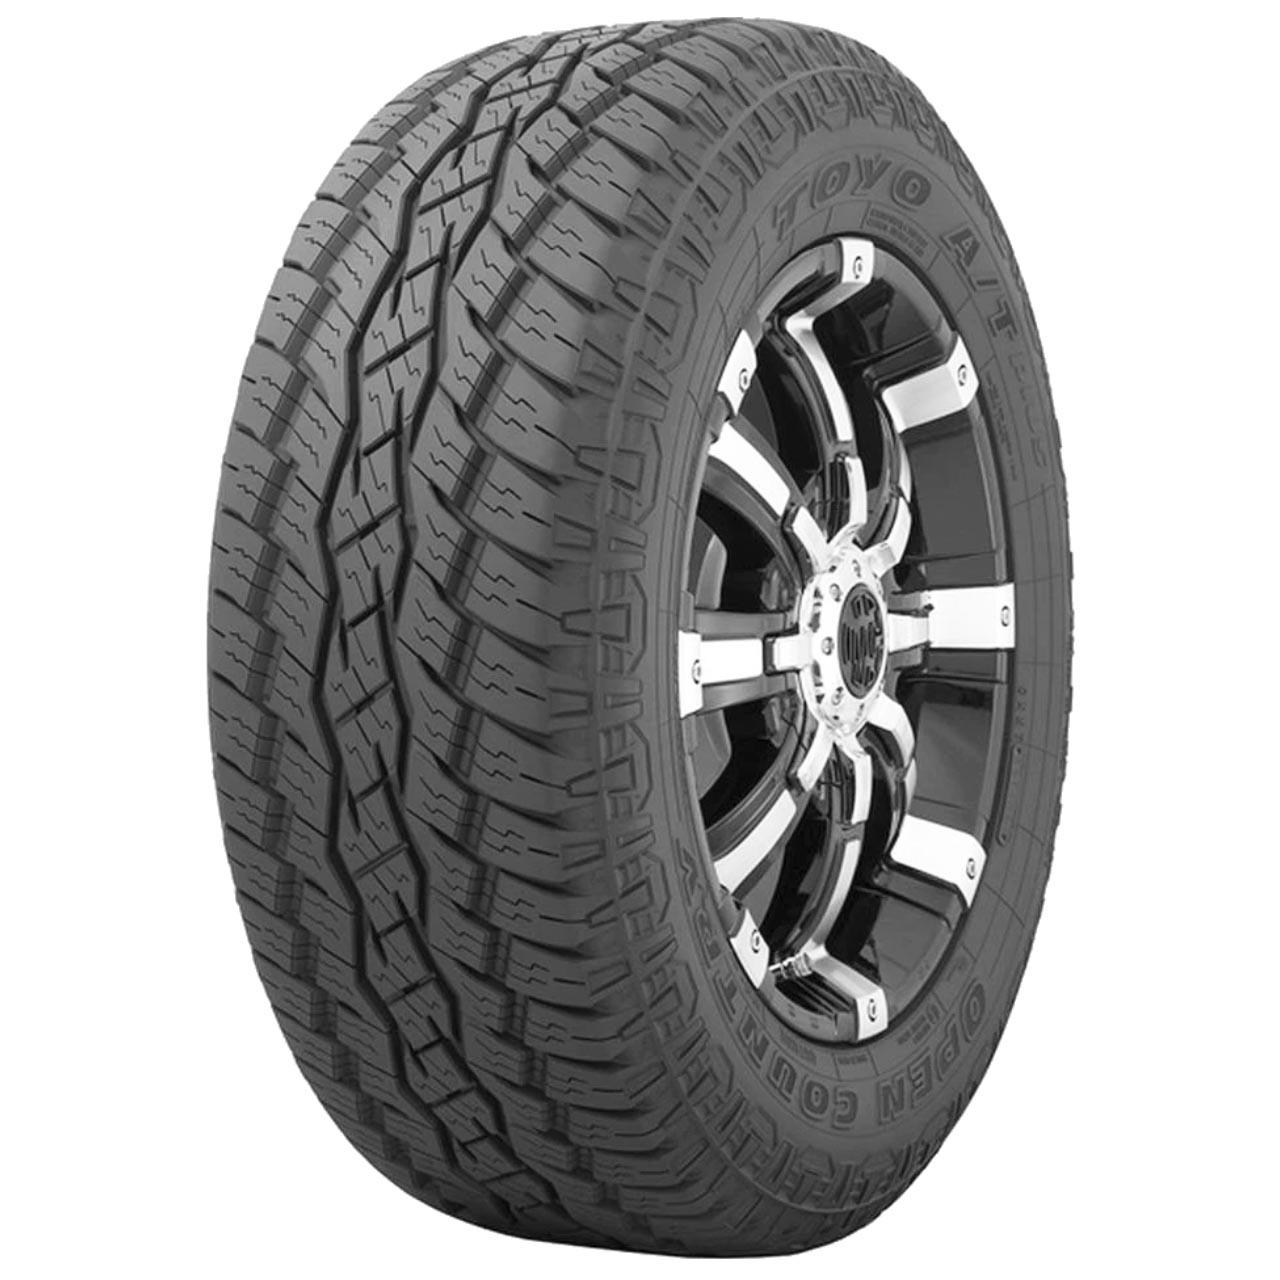 Toyo Open Country AT Plus 255/70R16 111T